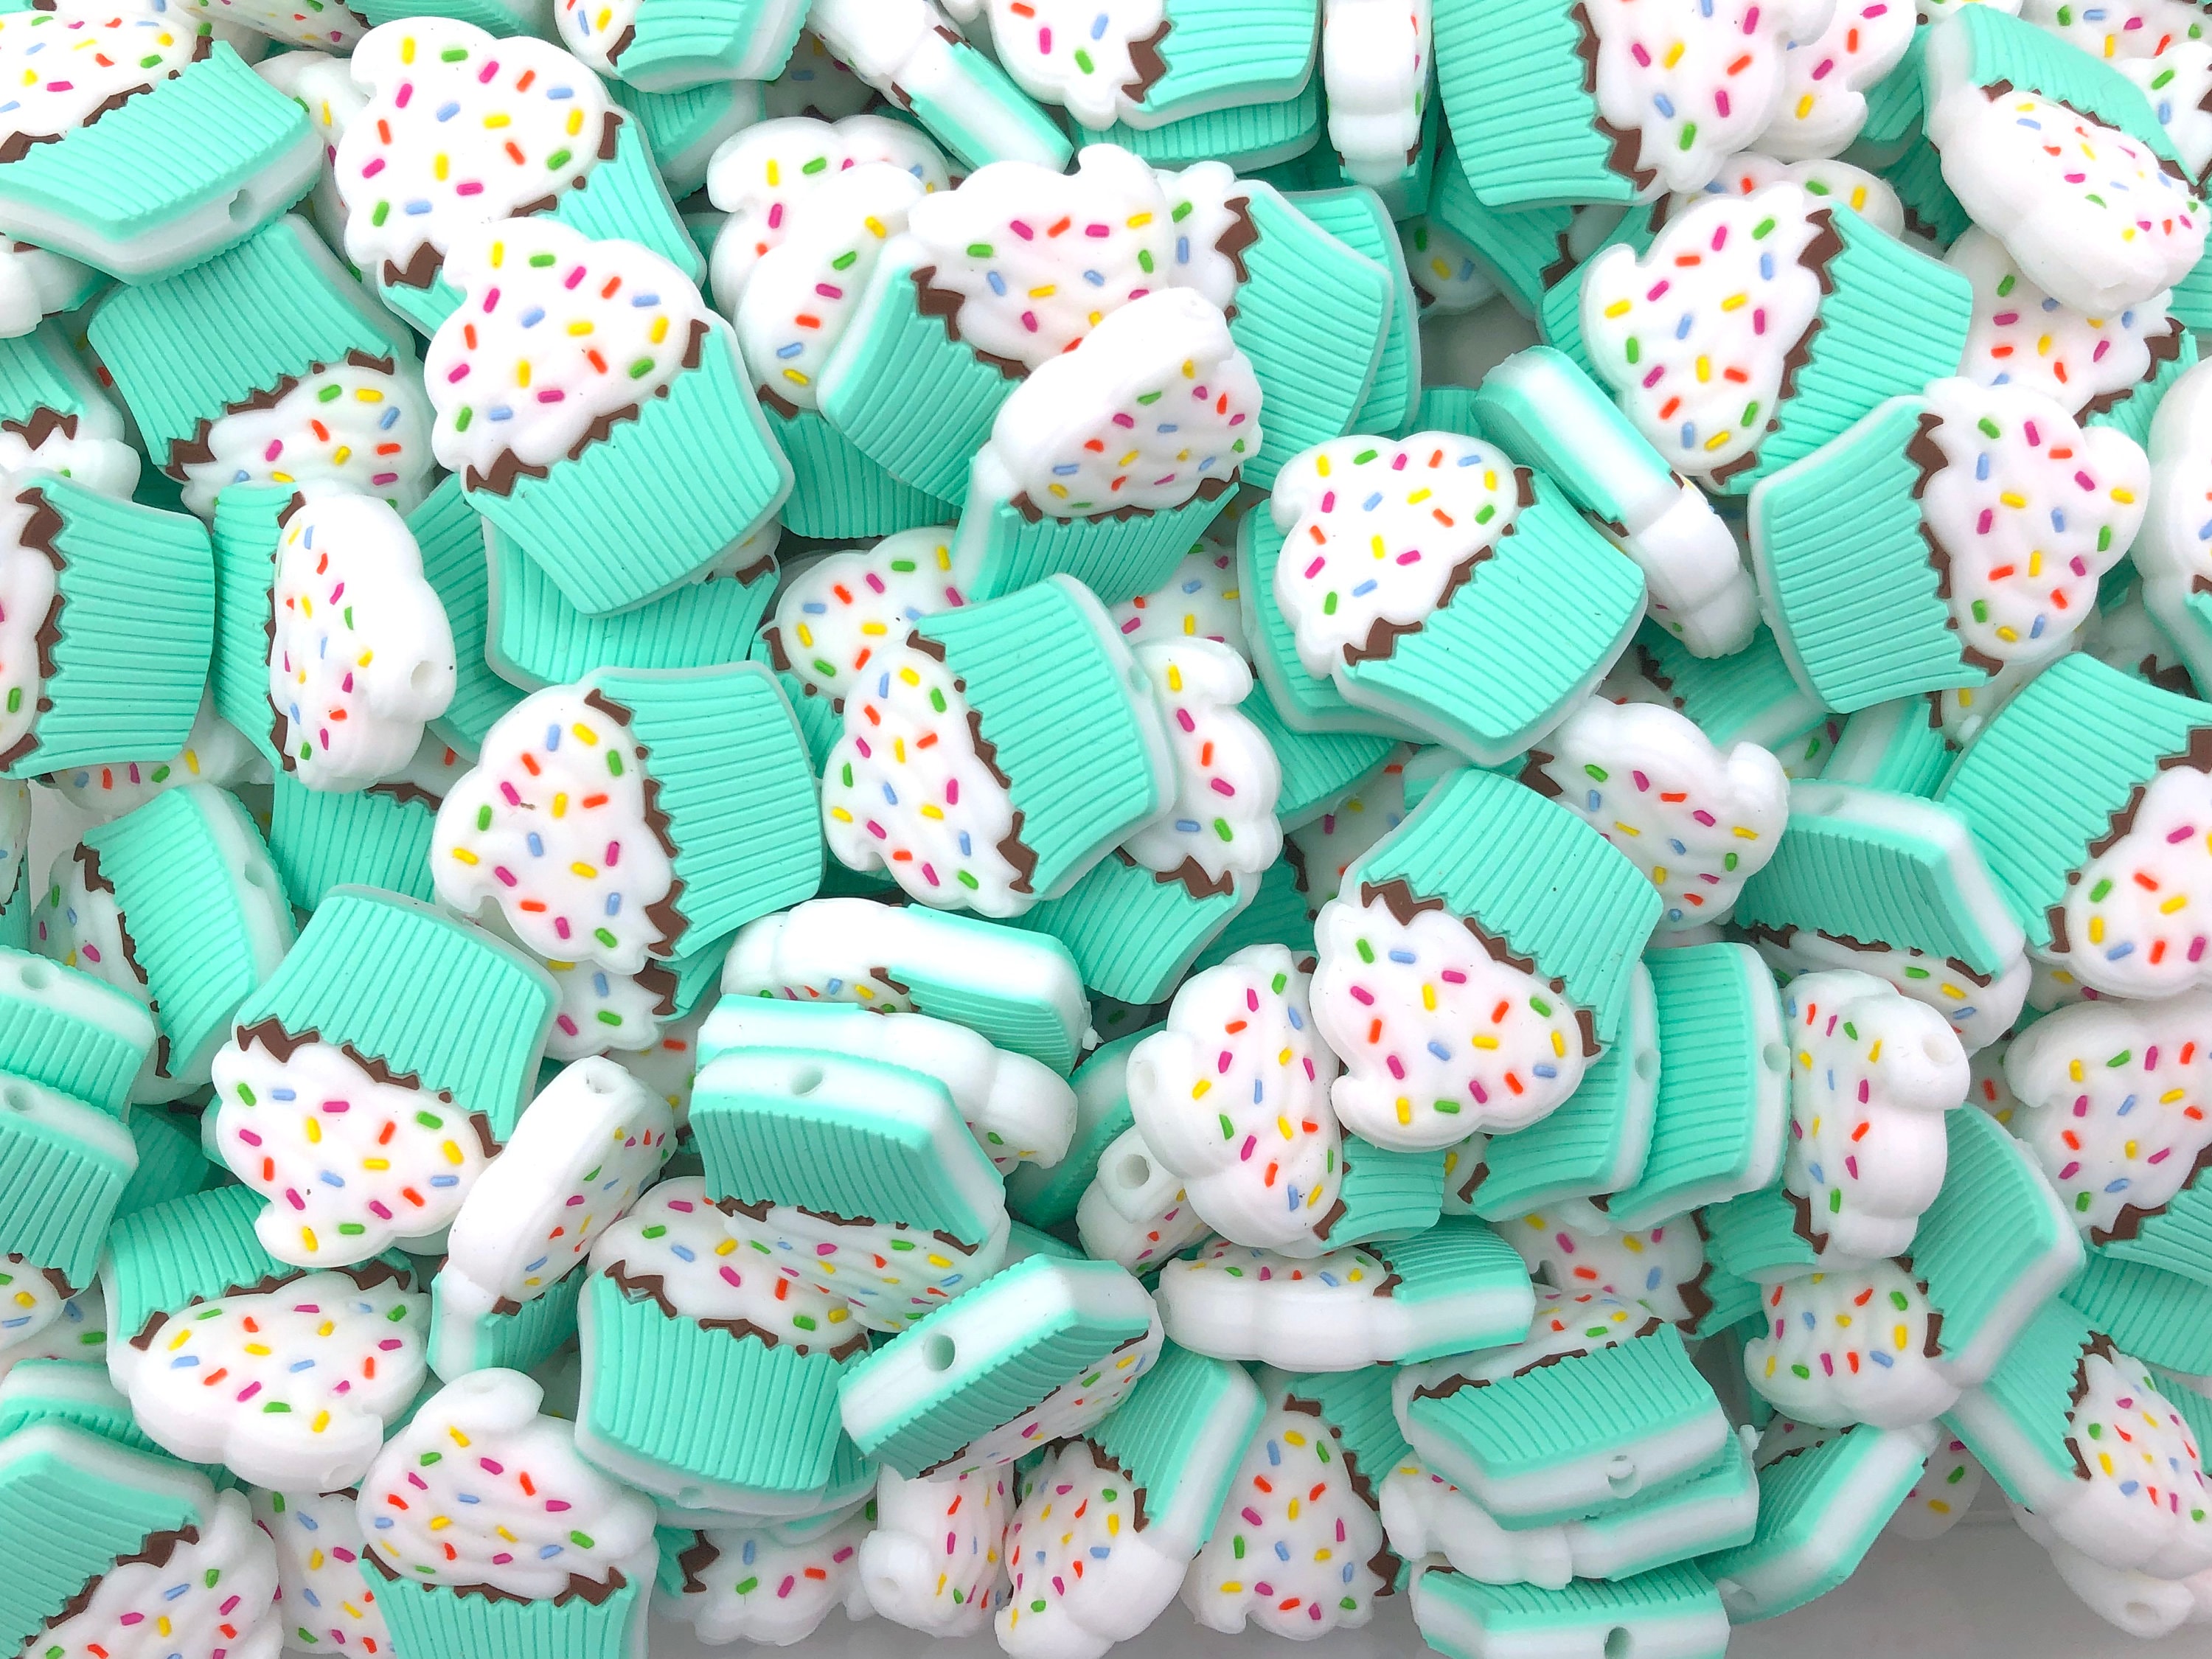 Turquoise & Mint Cow Print Silicone Bead Mix, 50 or 100 BULK Round